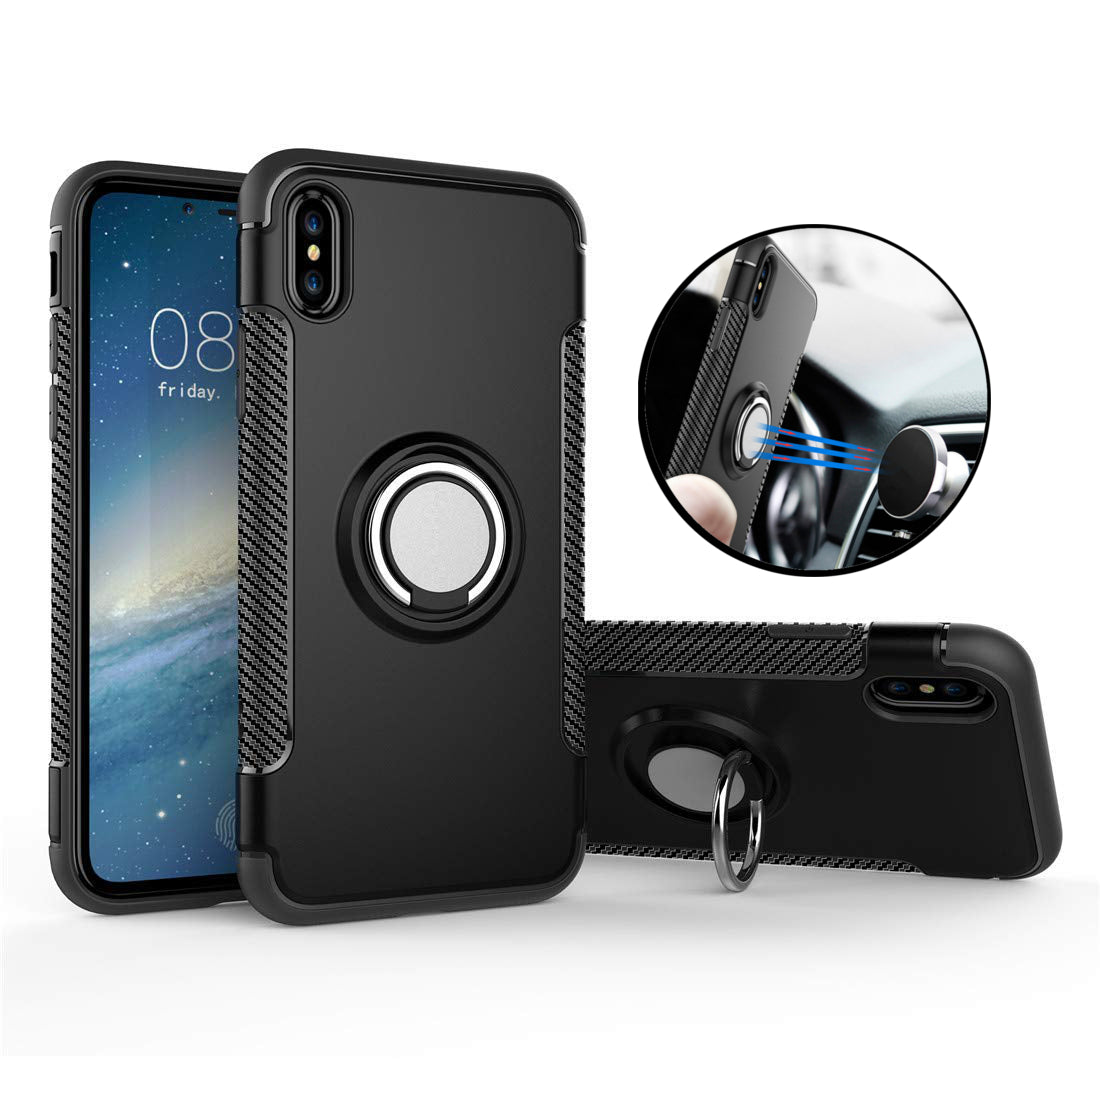 Bakeey Protective Case For iPhone XS Max Ring Grip Kickstand Stand Holder Back Cover 